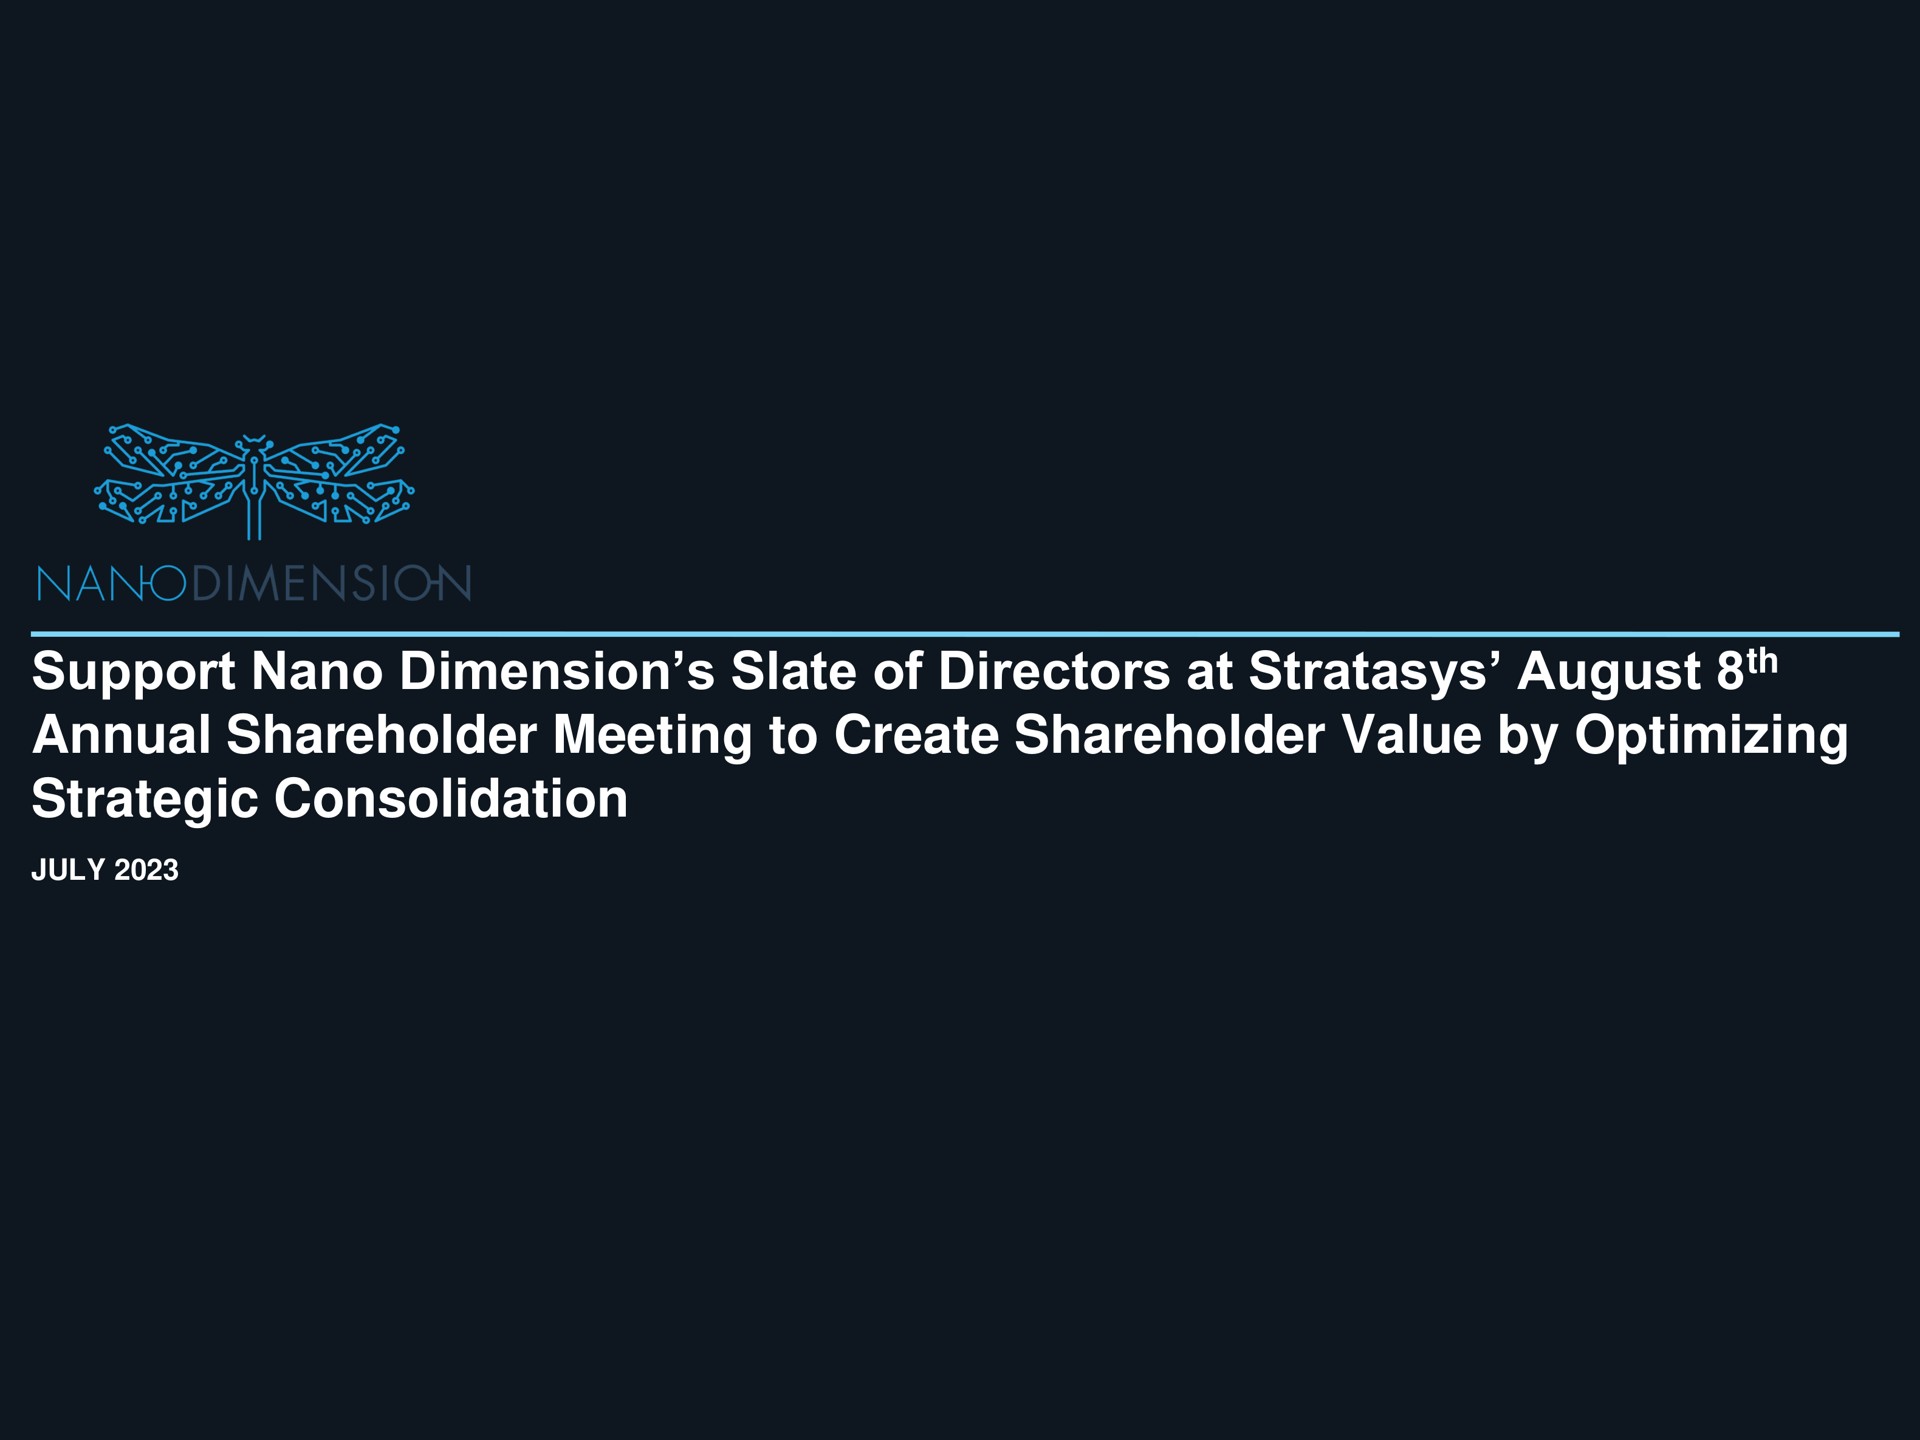 support dimension slate of directors at august annual shareholder meeting to create shareholder value by optimizing strategic consolidation | Nano Dimension